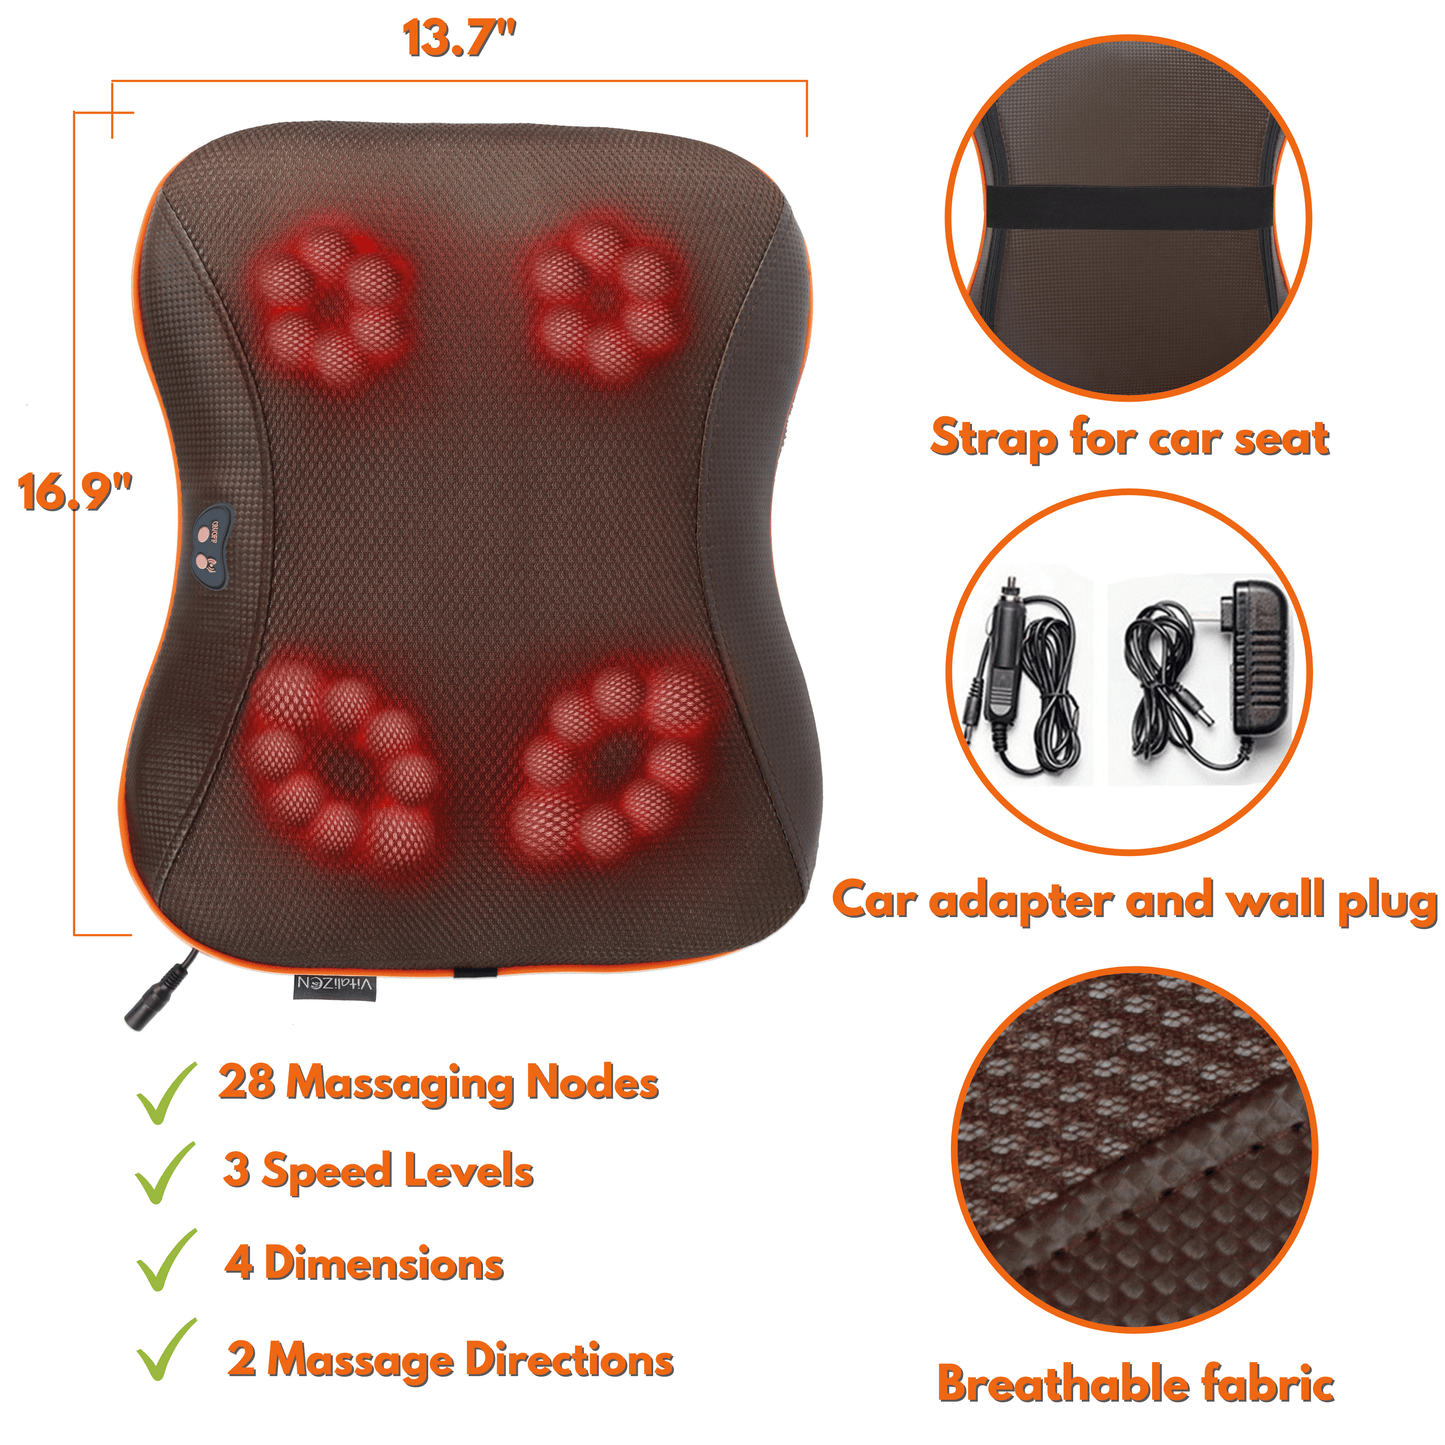 Electric Massage Pillow with Infrared Heating - Pain Relief Massager - VitaliZEN